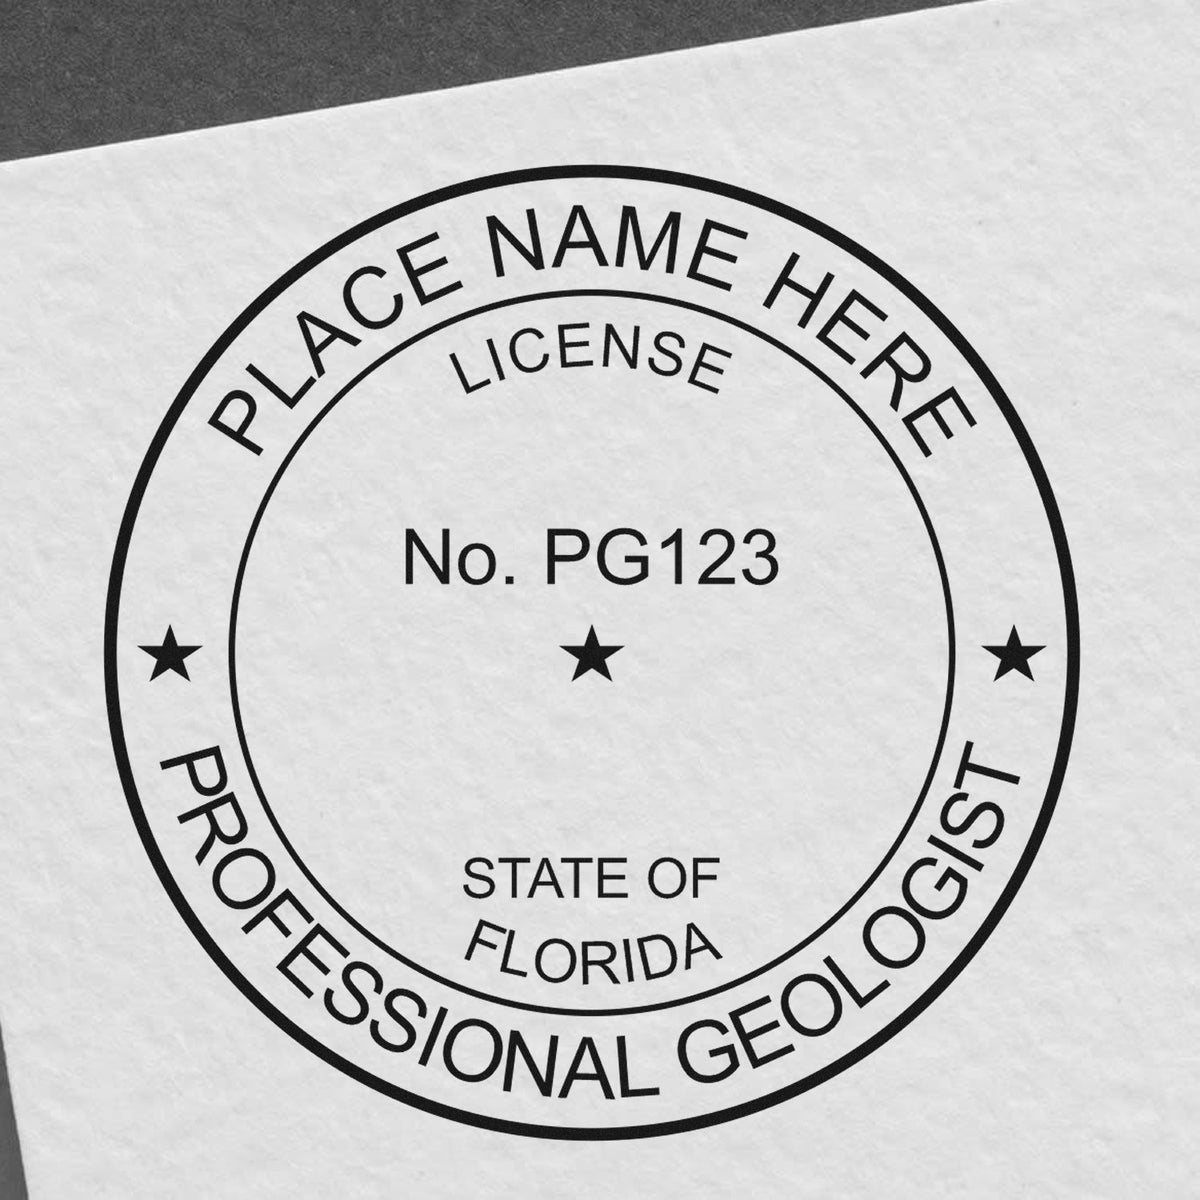 A photograph of the Florida Professional Geologist Seal Stamp stamp impression reveals a vivid, professional image of the on paper.